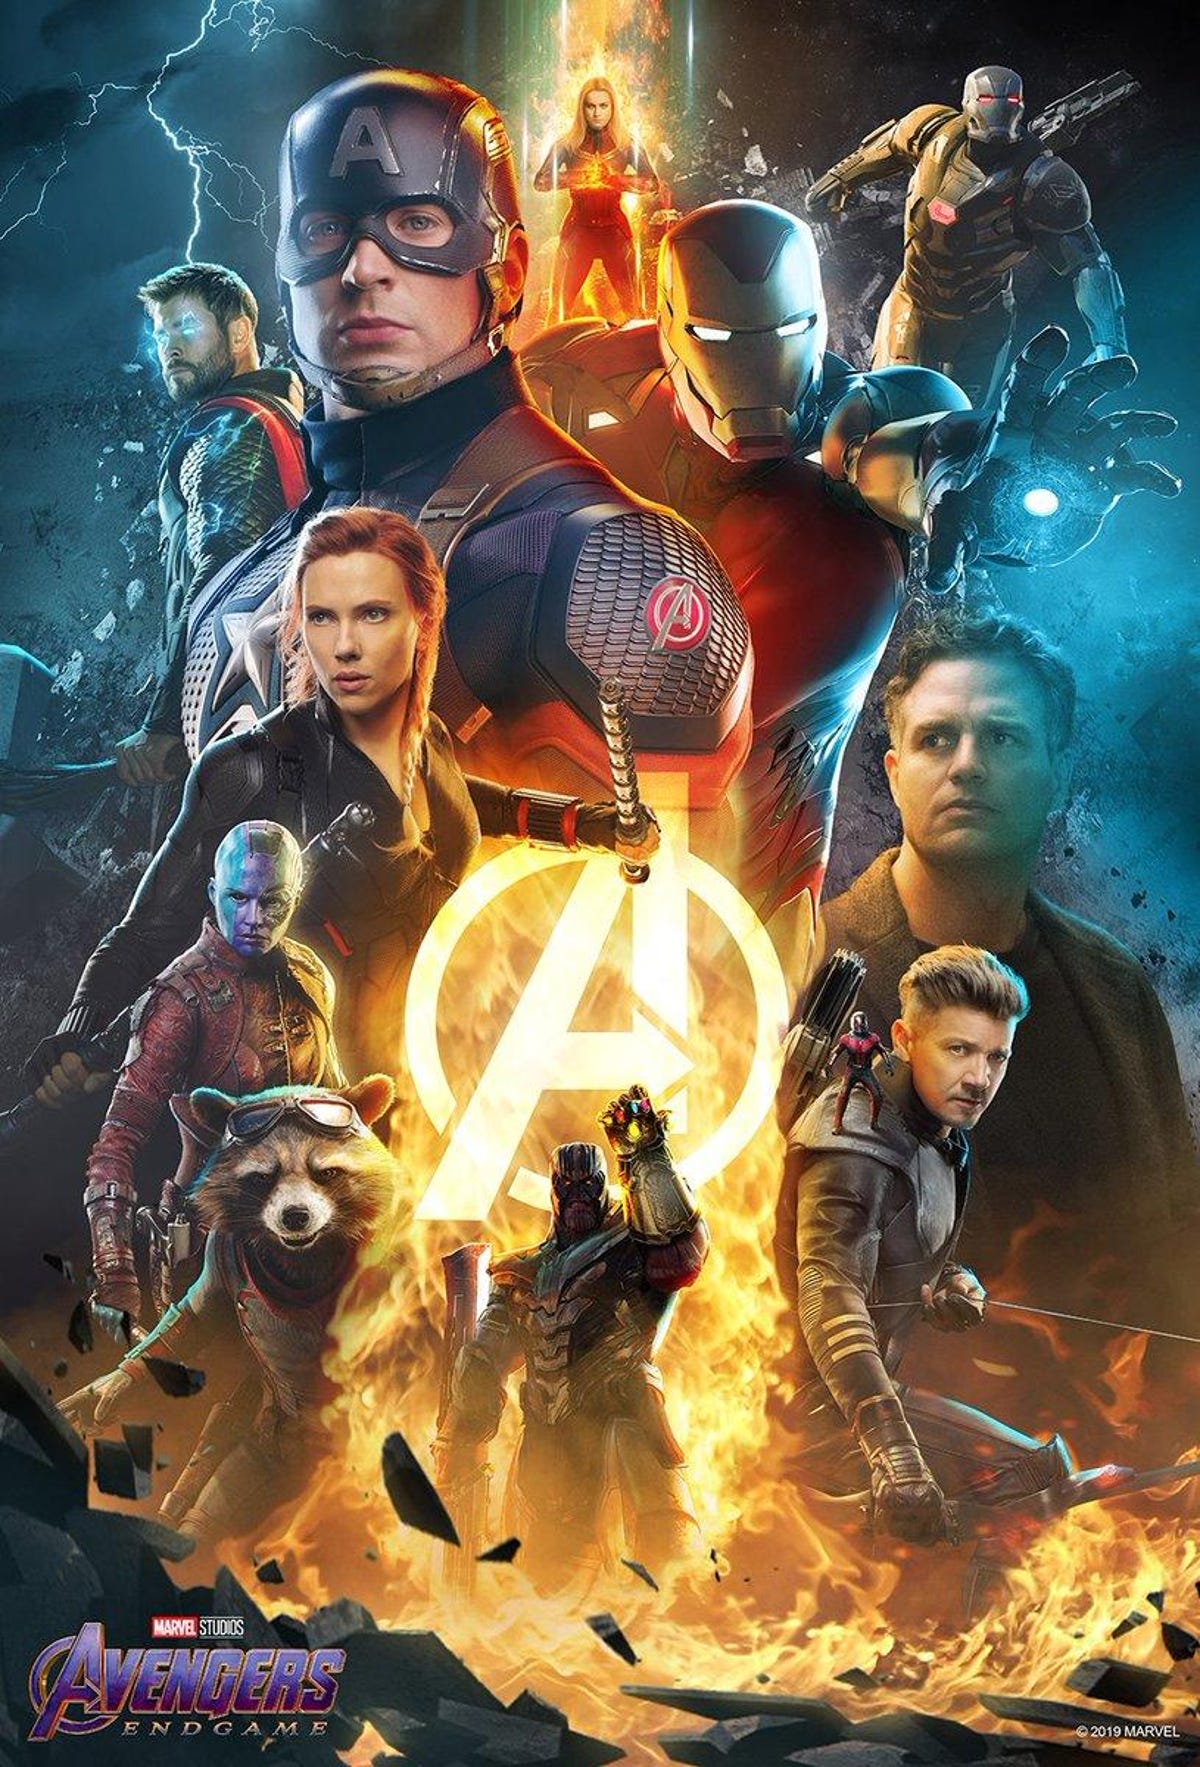 Avengers 4 All Actor Artwork Poster Wallpapers